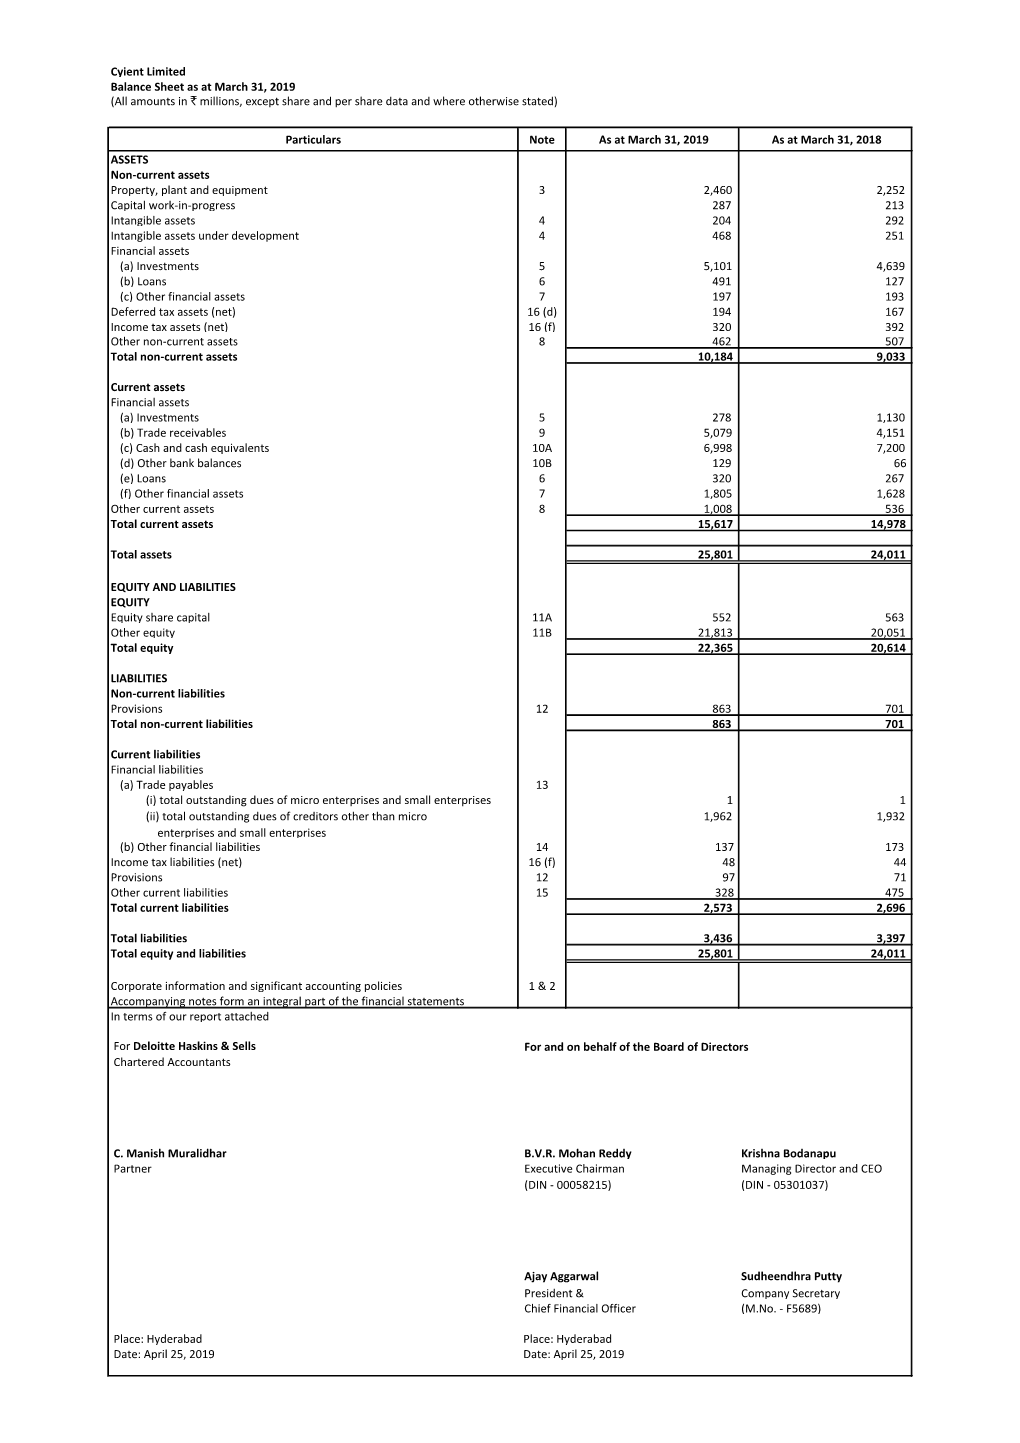 Cyient Limited Balance Sheet As at March 31, 2019 (All Amounts in ` Millions, Except Share and Per Share Data and Where Otherwise Stated)